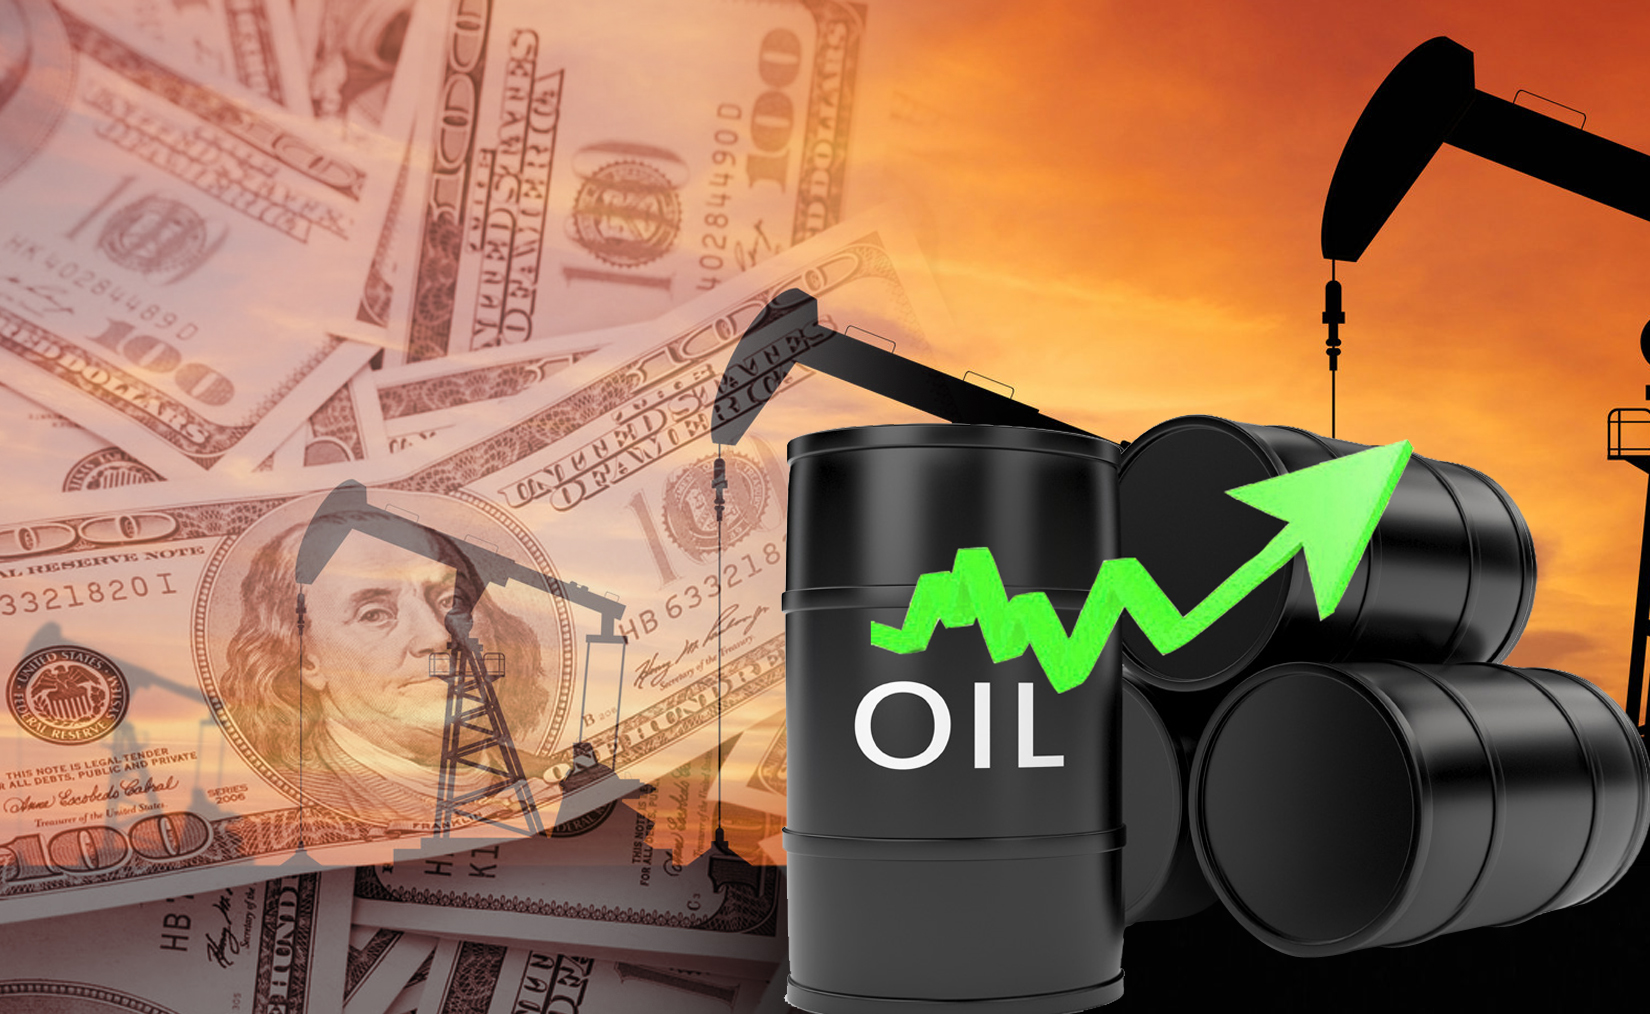 Kuwait oil price up 57 cents to USD 43.73 pb                                                                                                                                                                                                              